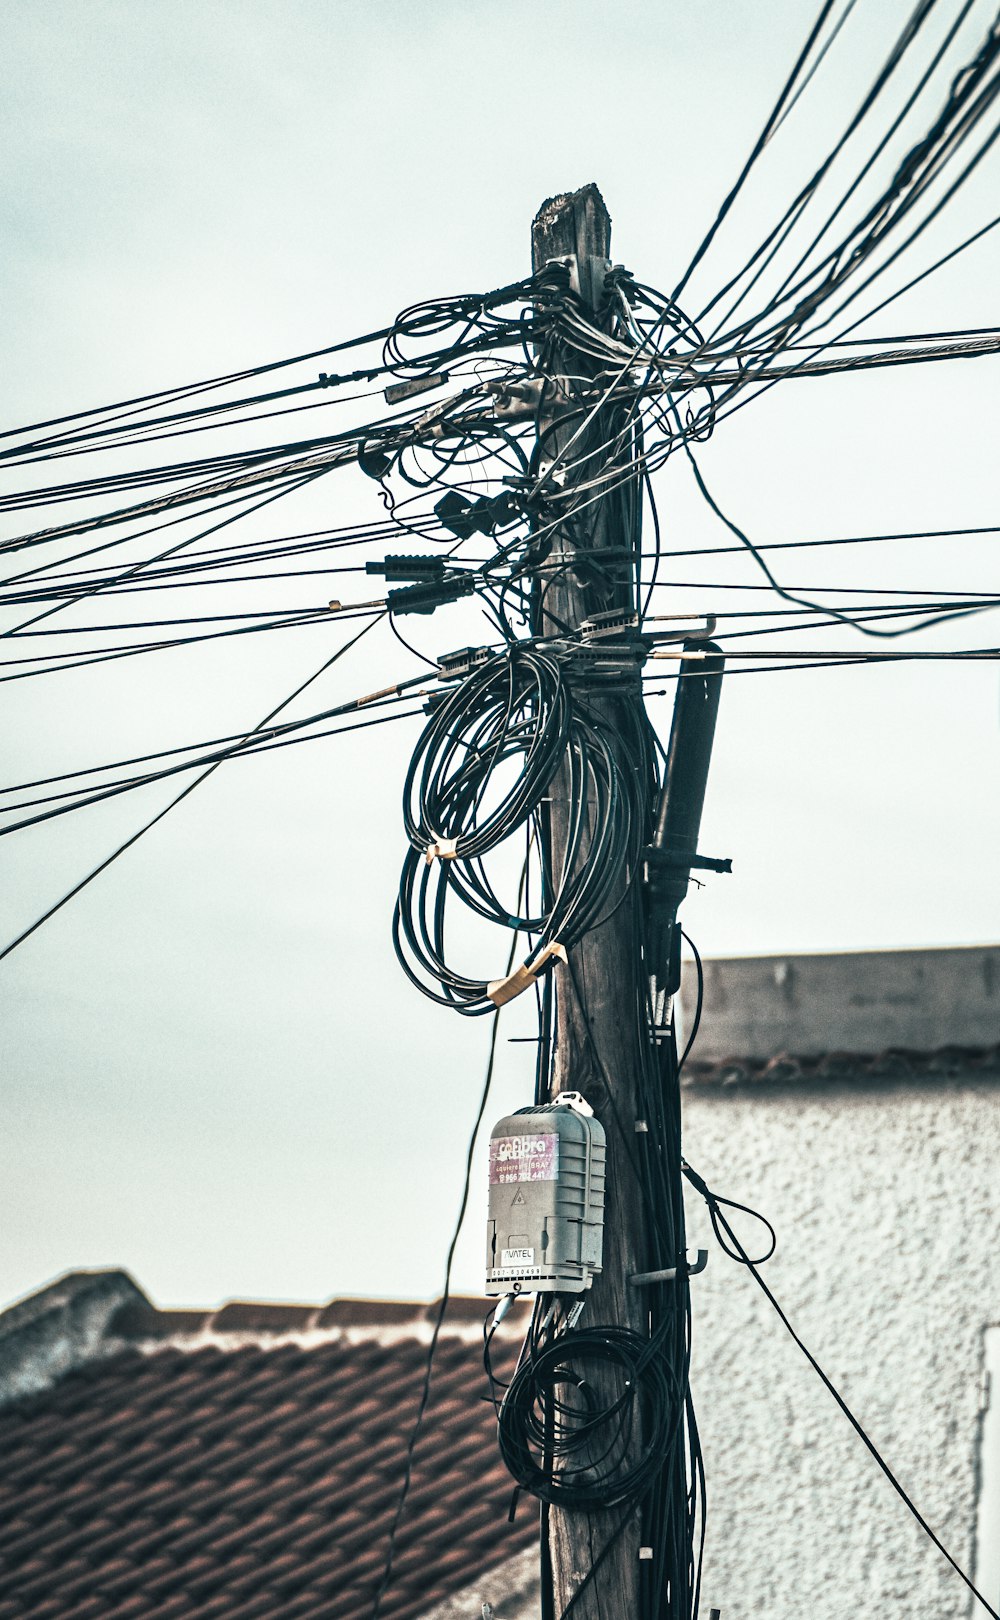 a bunch of wires and wires hanging from a pole